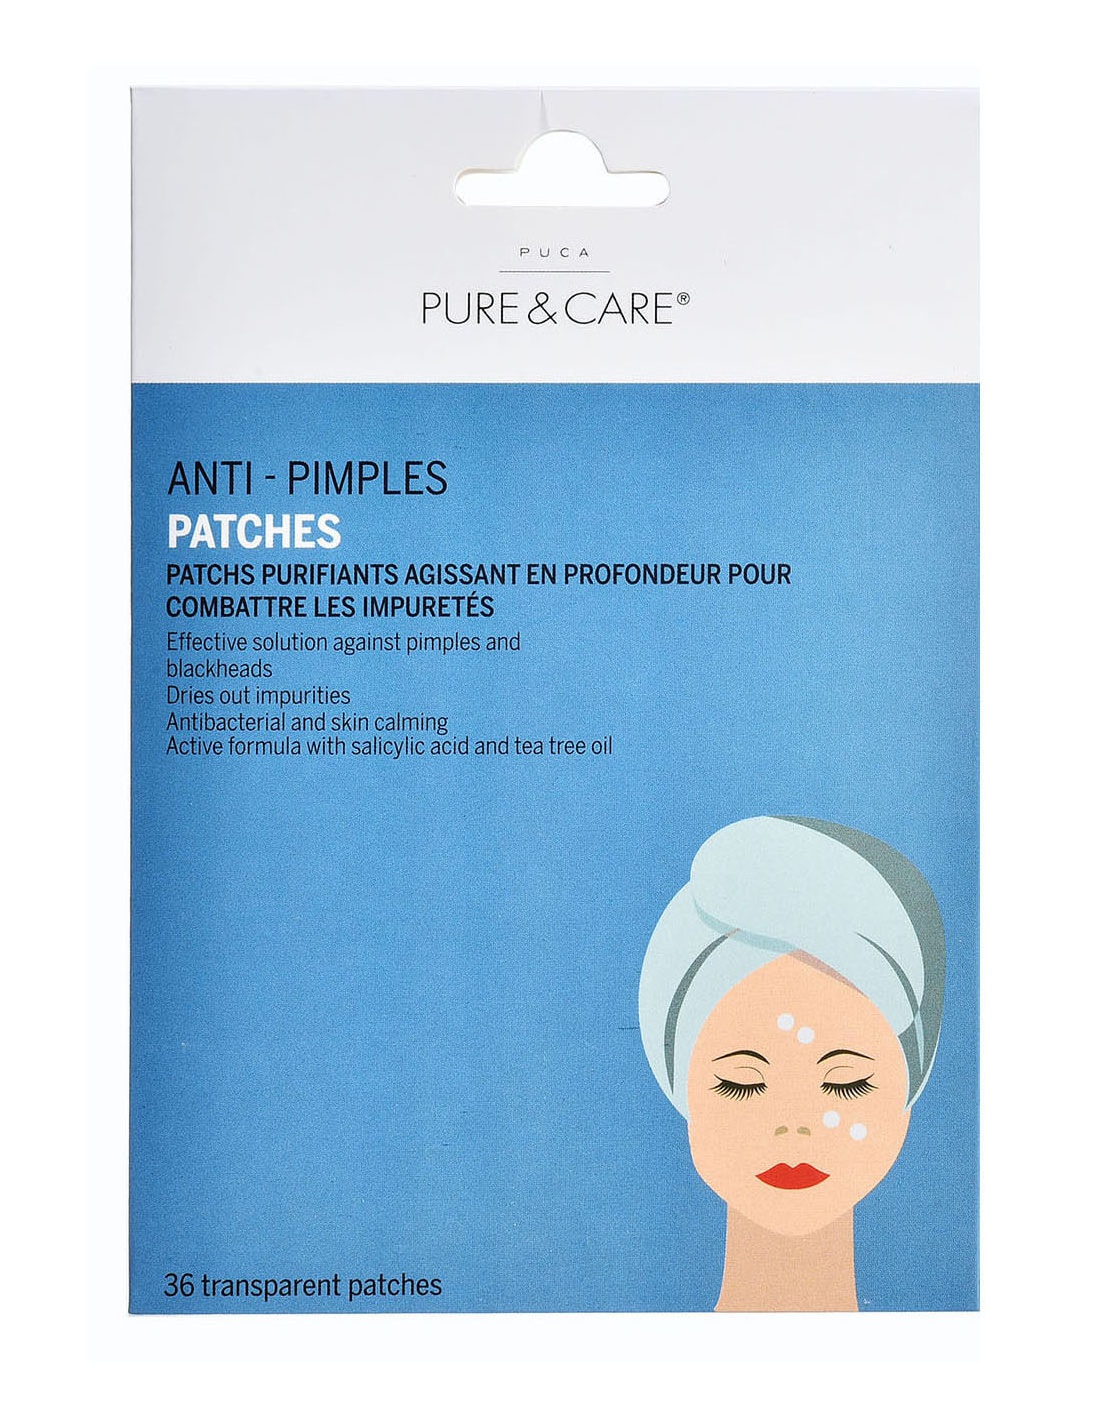 Puca Pure & Care Anti-Pimples Patches